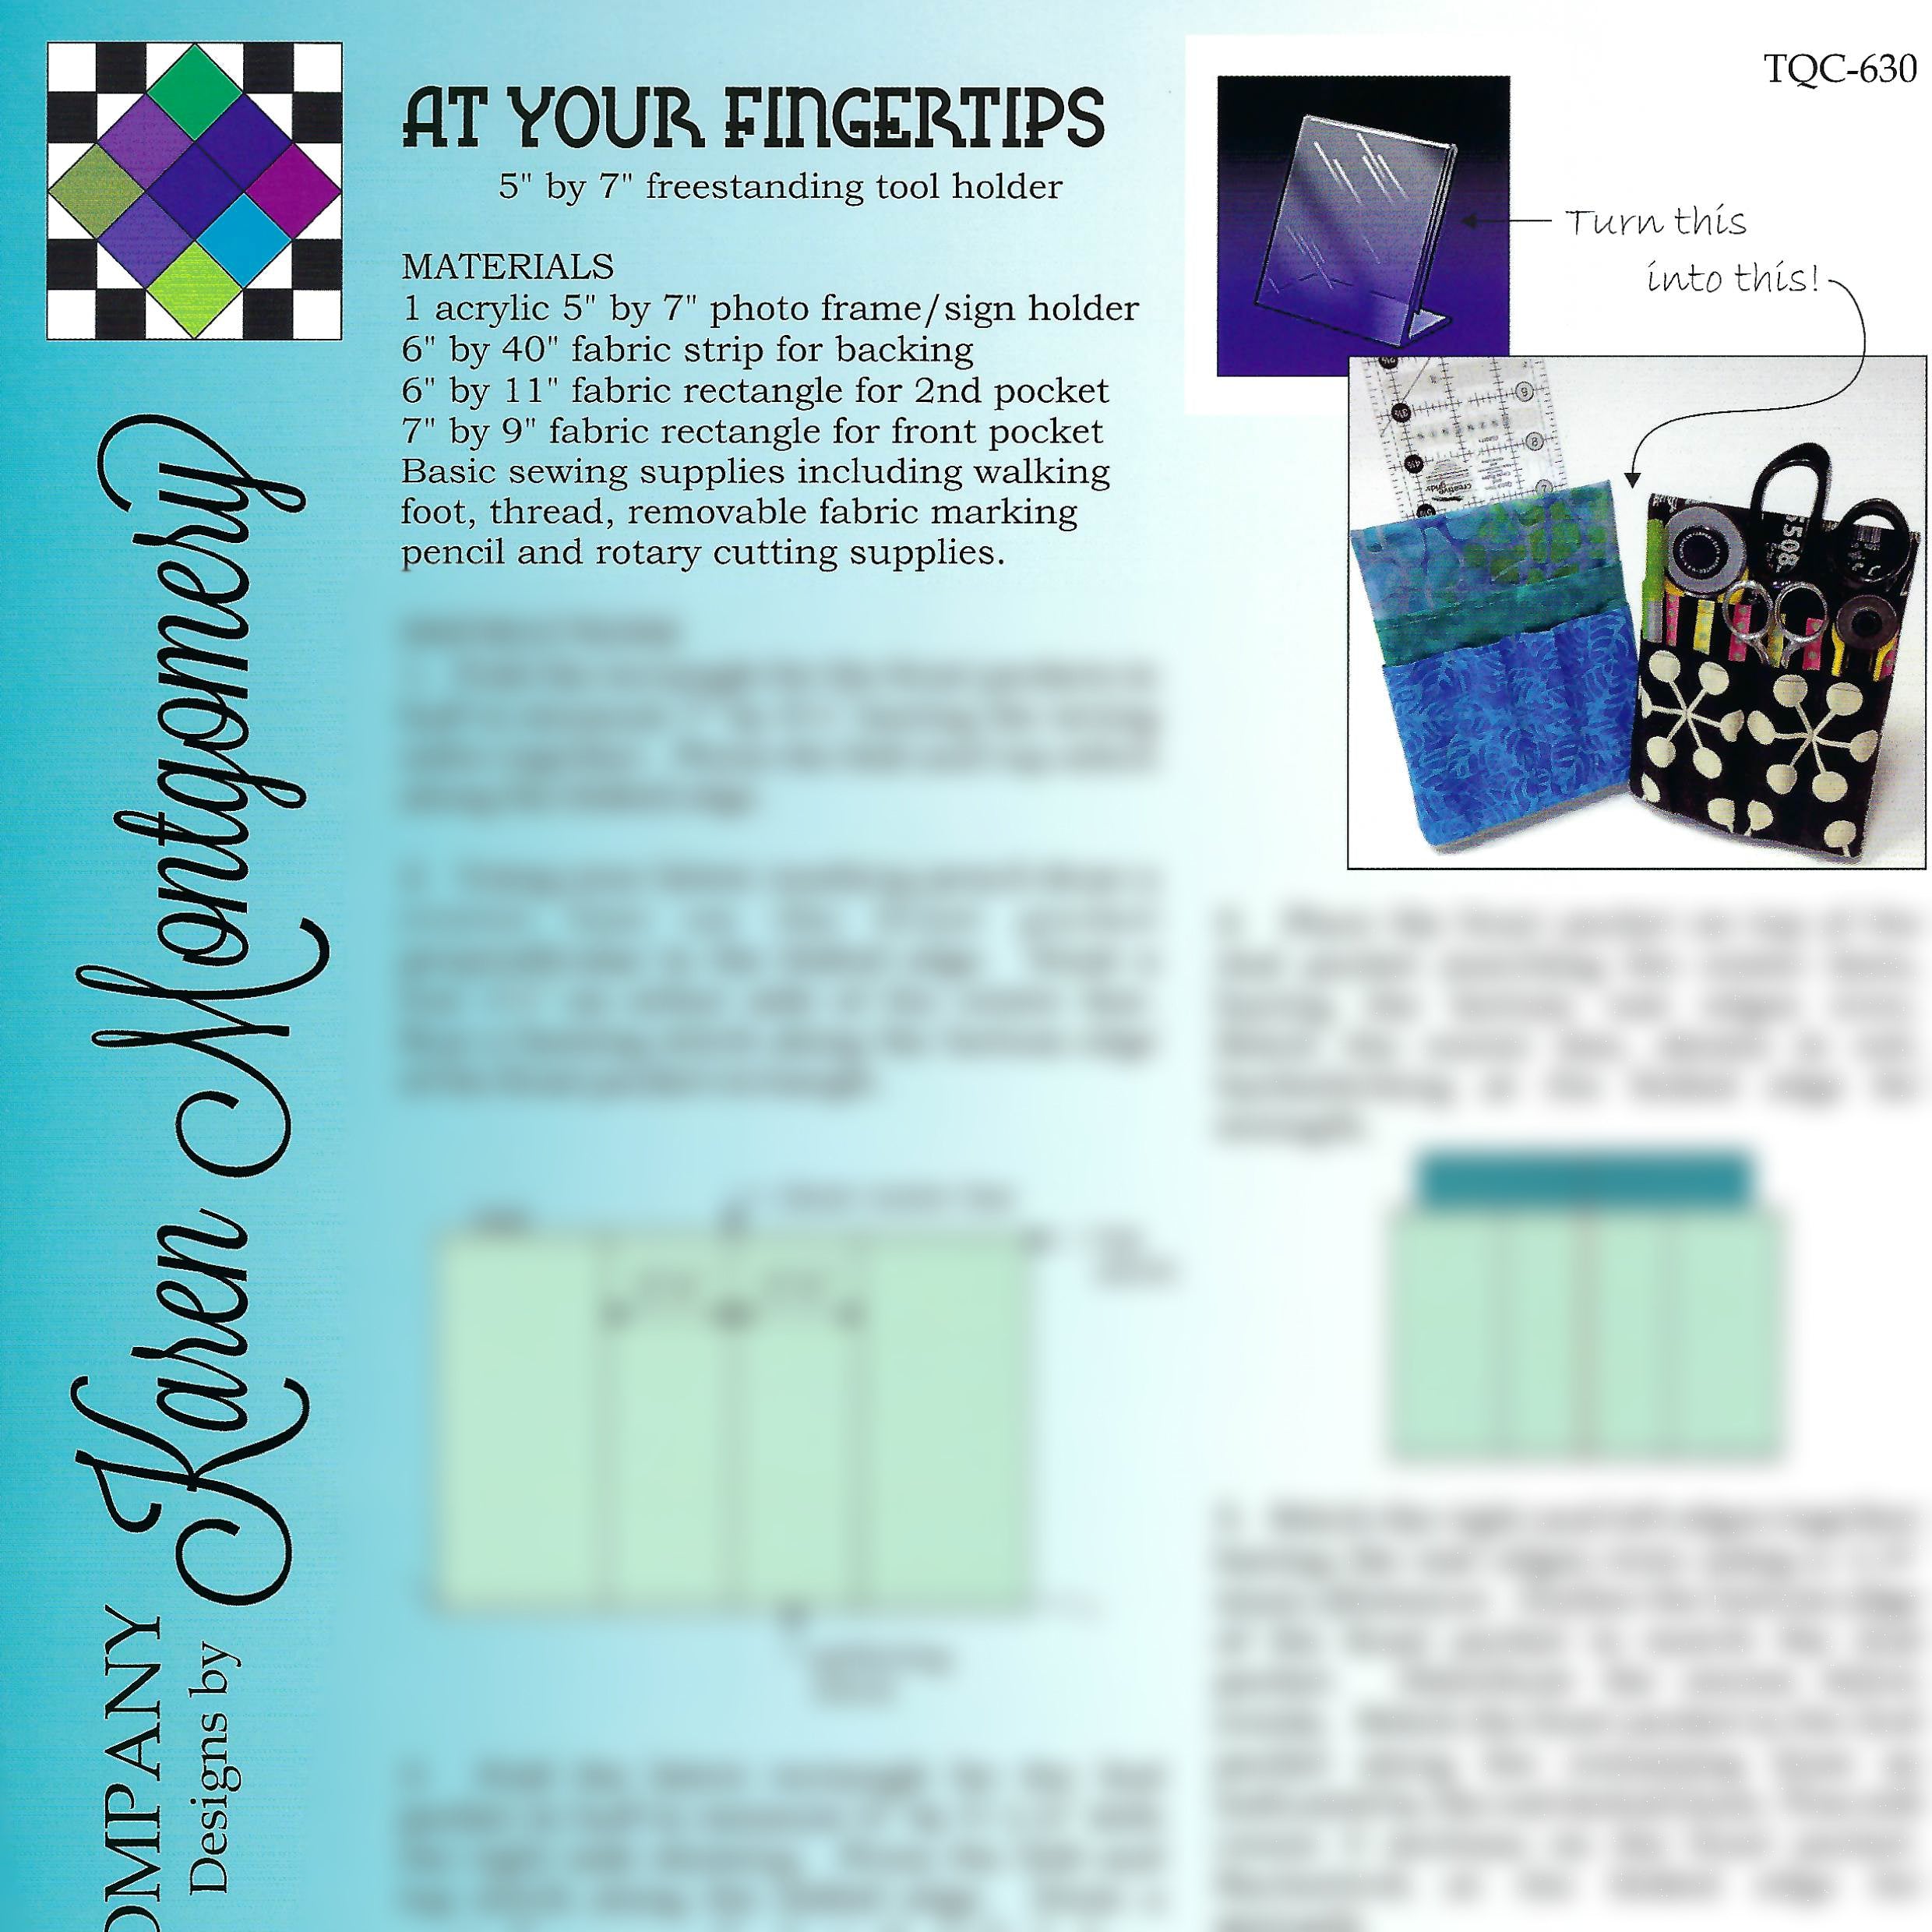 At Your Fingertips Project Sheet